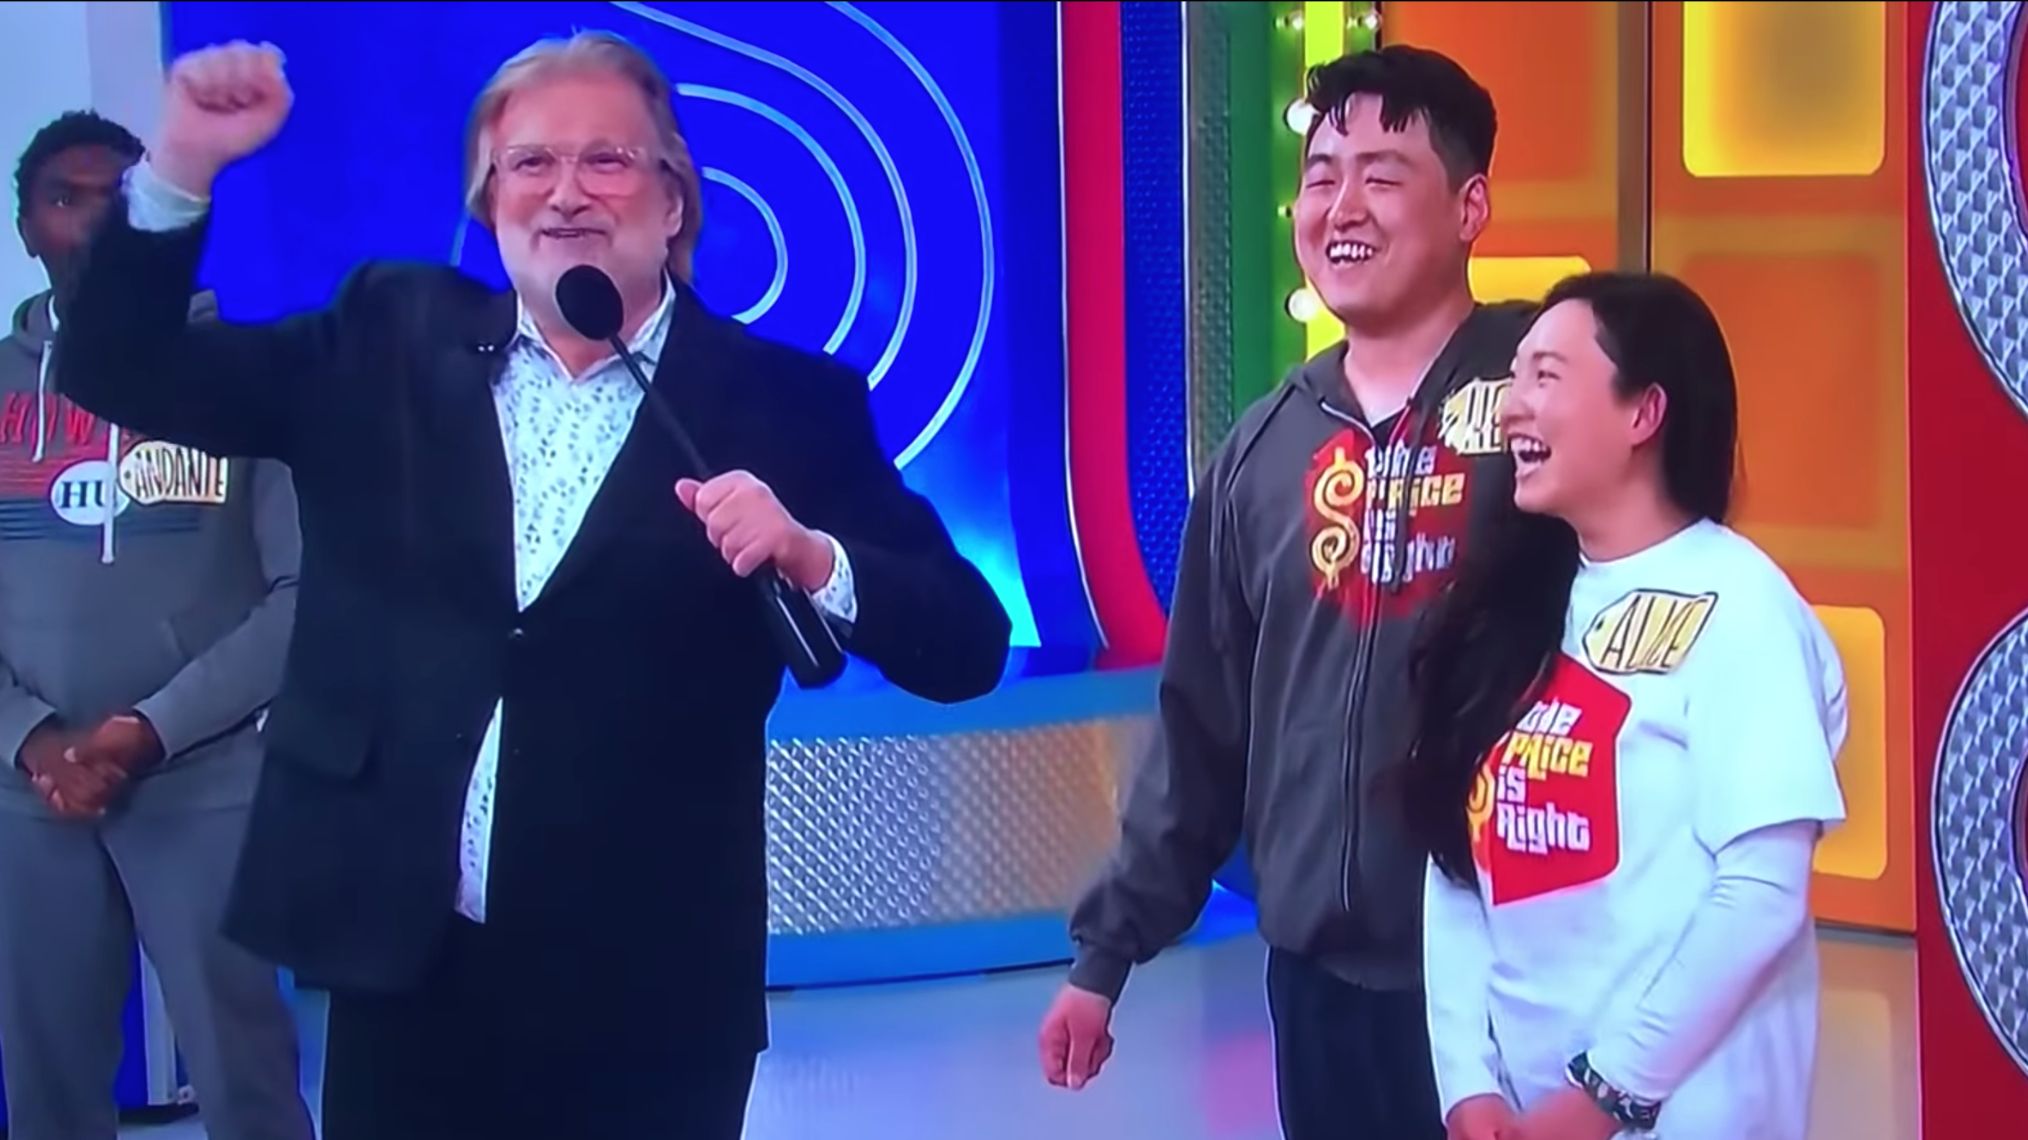 watch ‘the price is right’ contestant dislocates shoulder as he celebrates win (video)